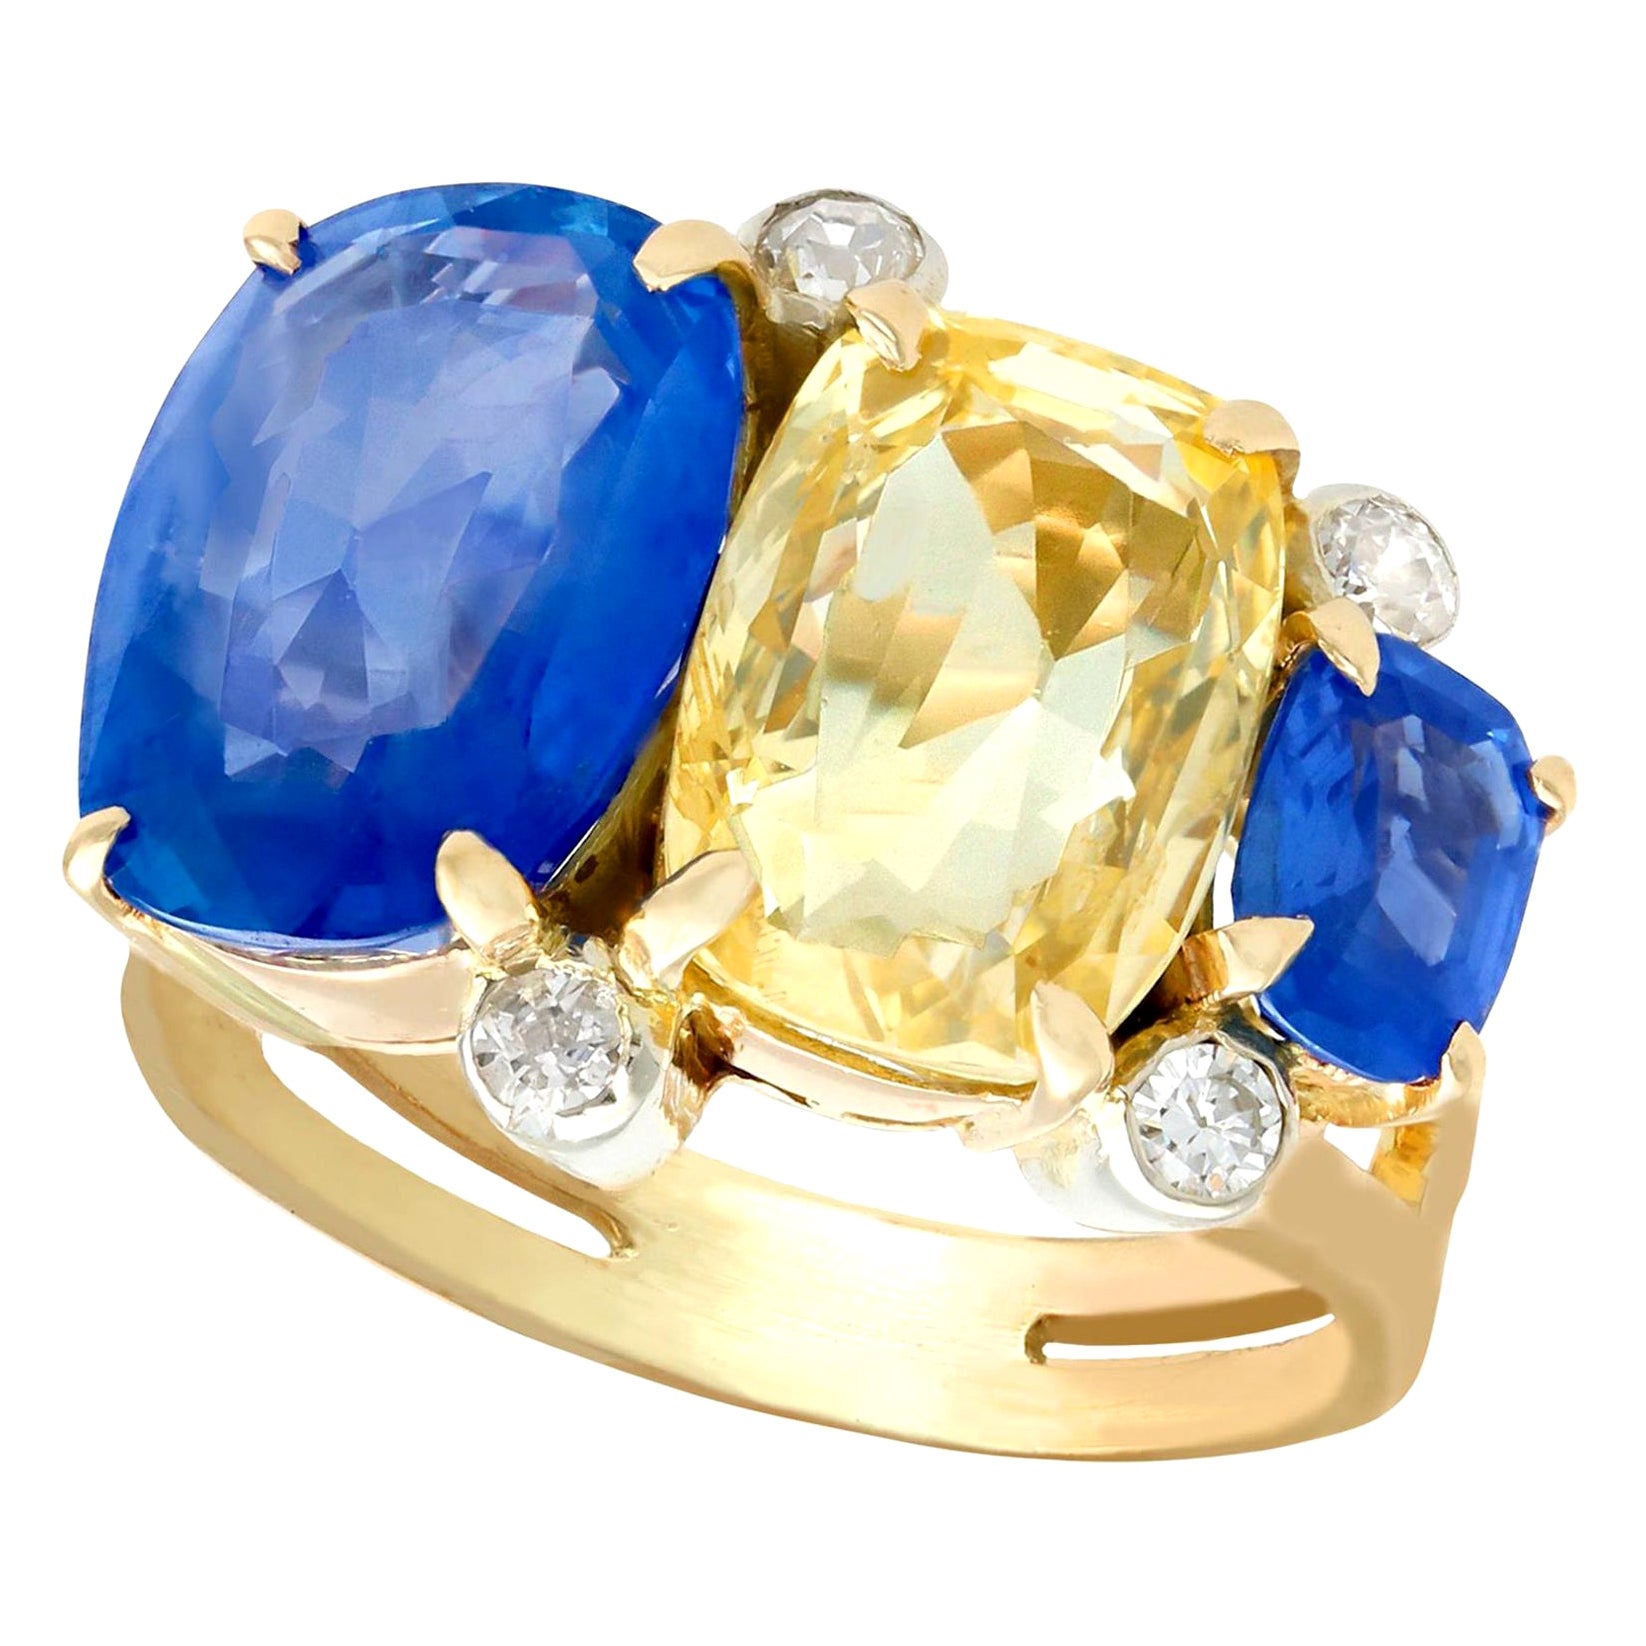 12.61 Carat Sapphire Diamond Yellow Gold Cocktail Ring For Sale